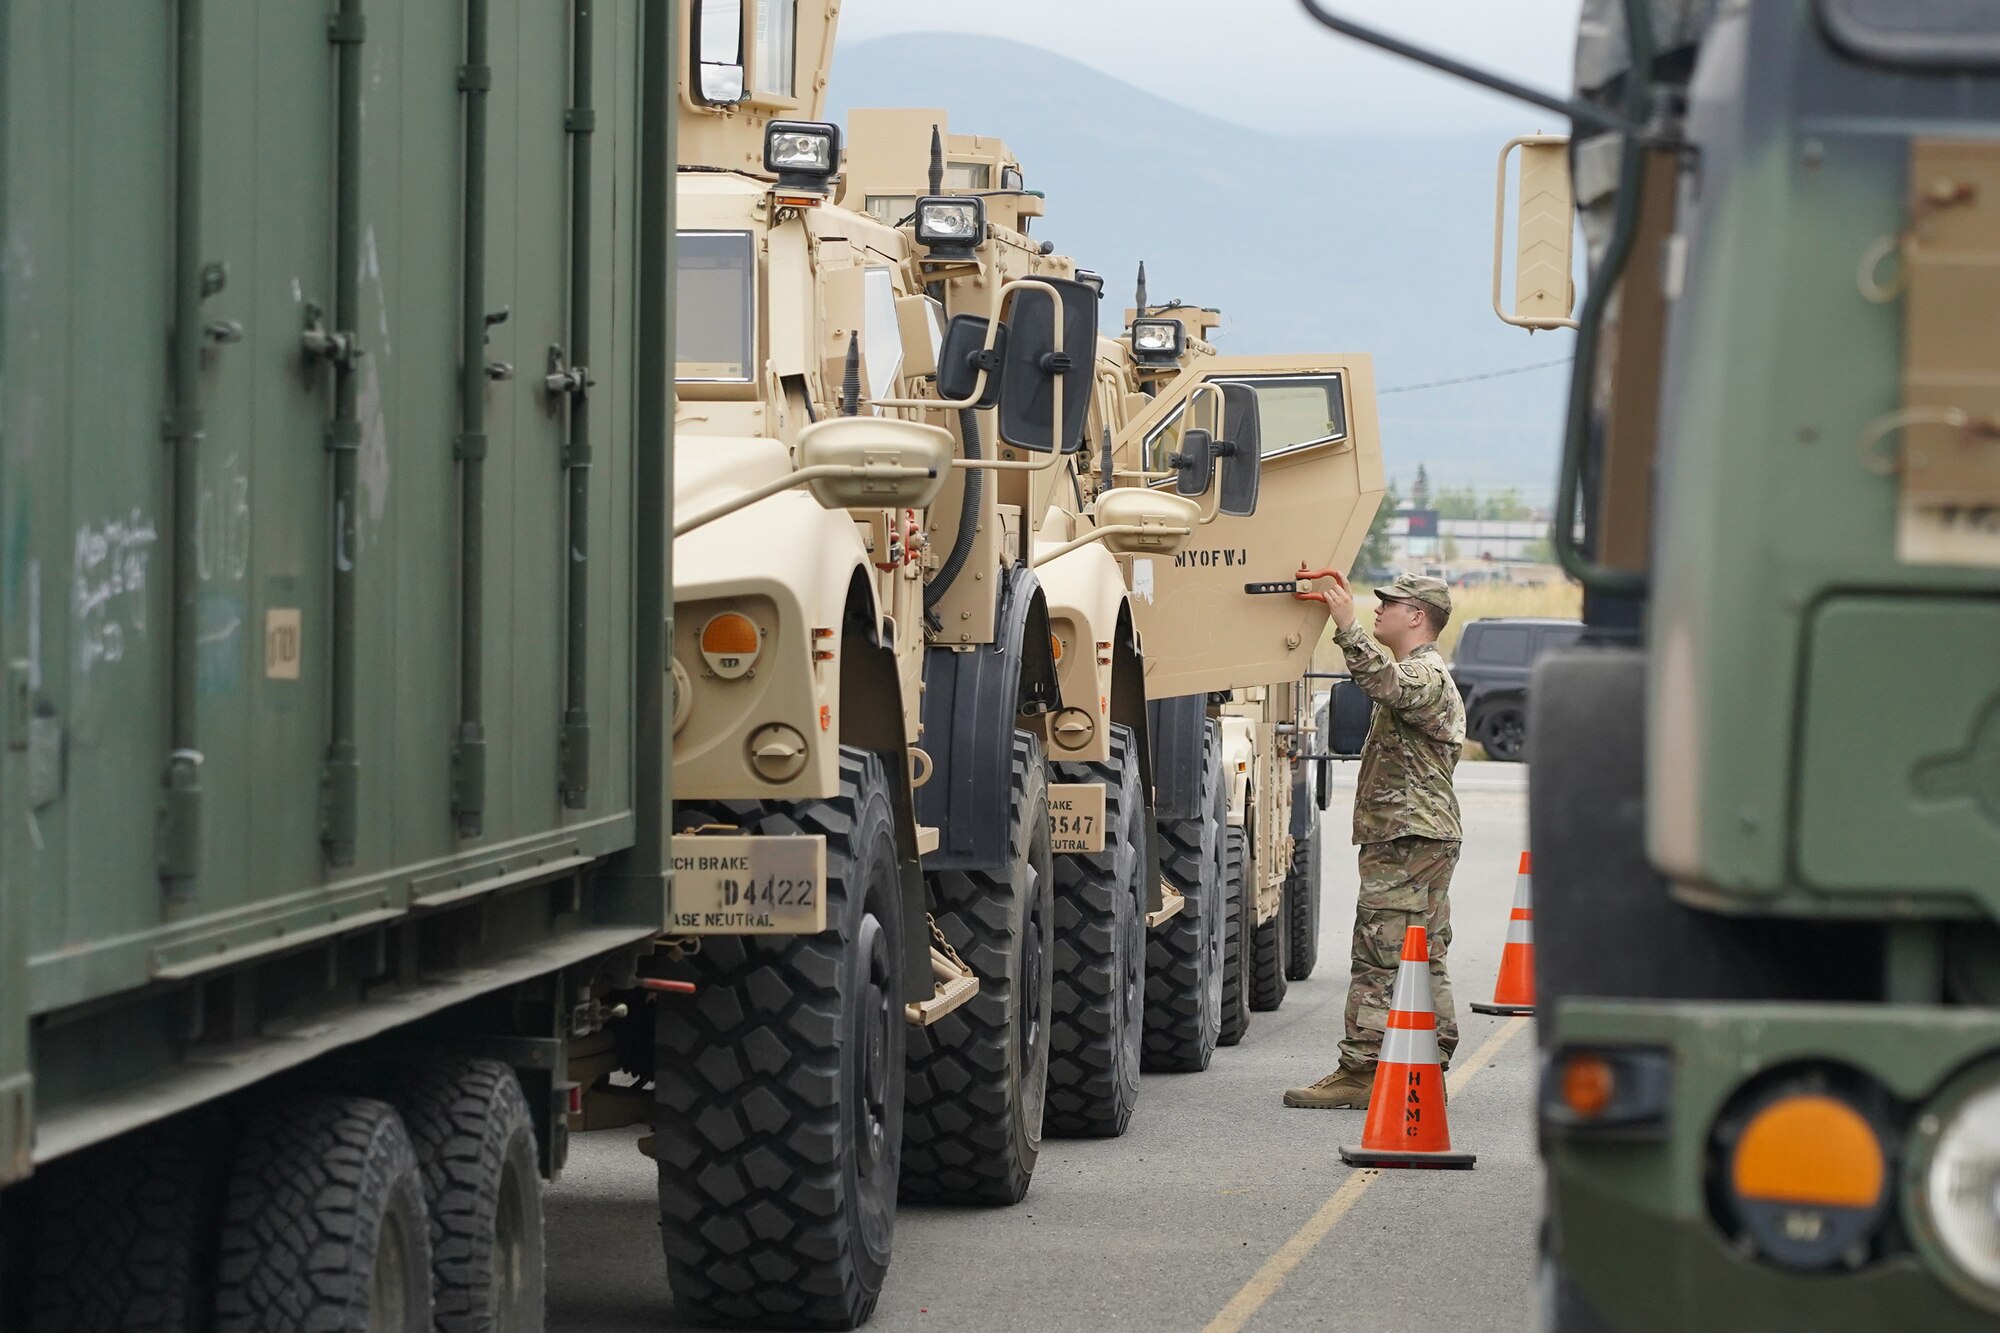 U.S. Army Spc. Cody Dunn, a chemical specialist and native of Cheyenne, WY, assigned to the 4th Infantry Brigade Combat Team. (Airborne), 25th Infantry Division, U.S. Army Alaska, inspects a vehicle for transportation operations on Joint Base Elmendorf-Richardson, Alaska, Aug. 14, 2019, as part of a joint readiness exercise. This exercise allows the Army, Air Force and Navy to move material and personnel using ground, ship, air and rail methods of transportation.